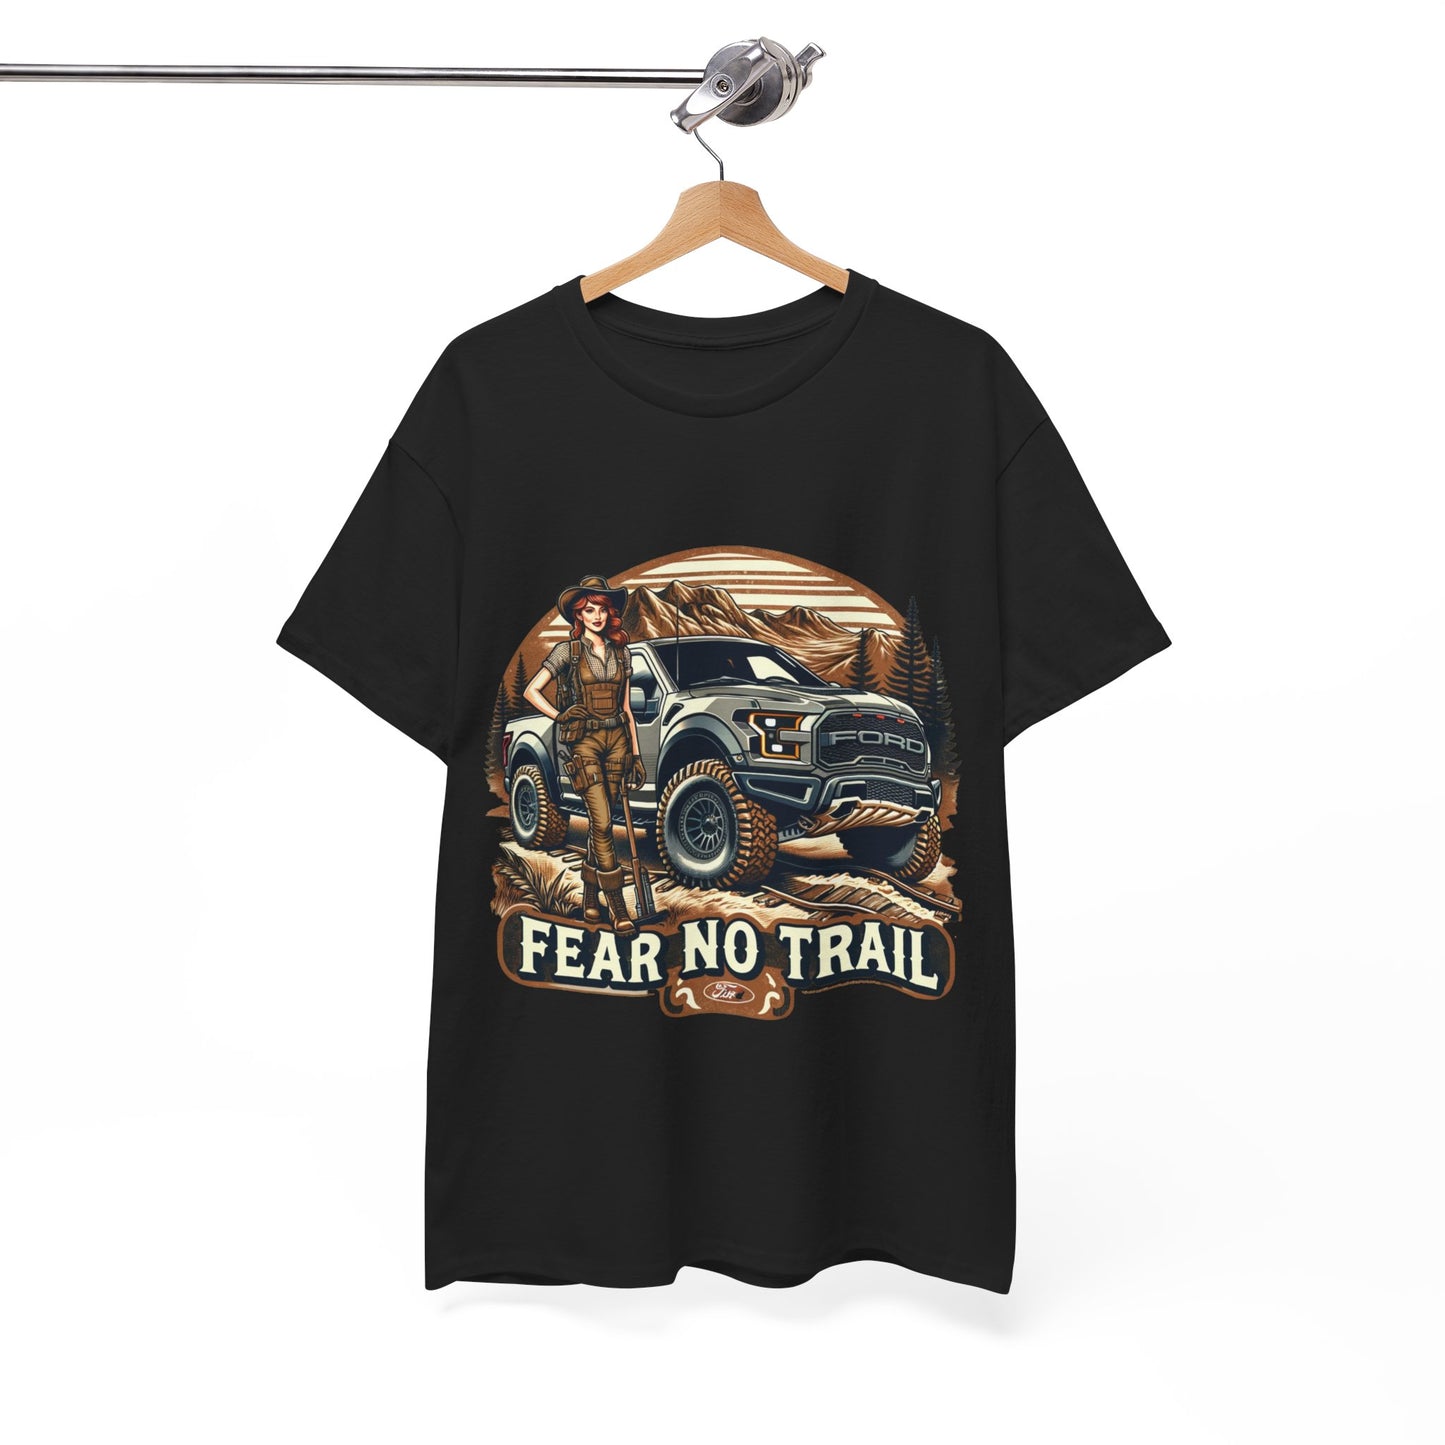 Buy 'Fear No Trail' Ford Raptor Tee: Embrace Off-Road Adventure in Style!